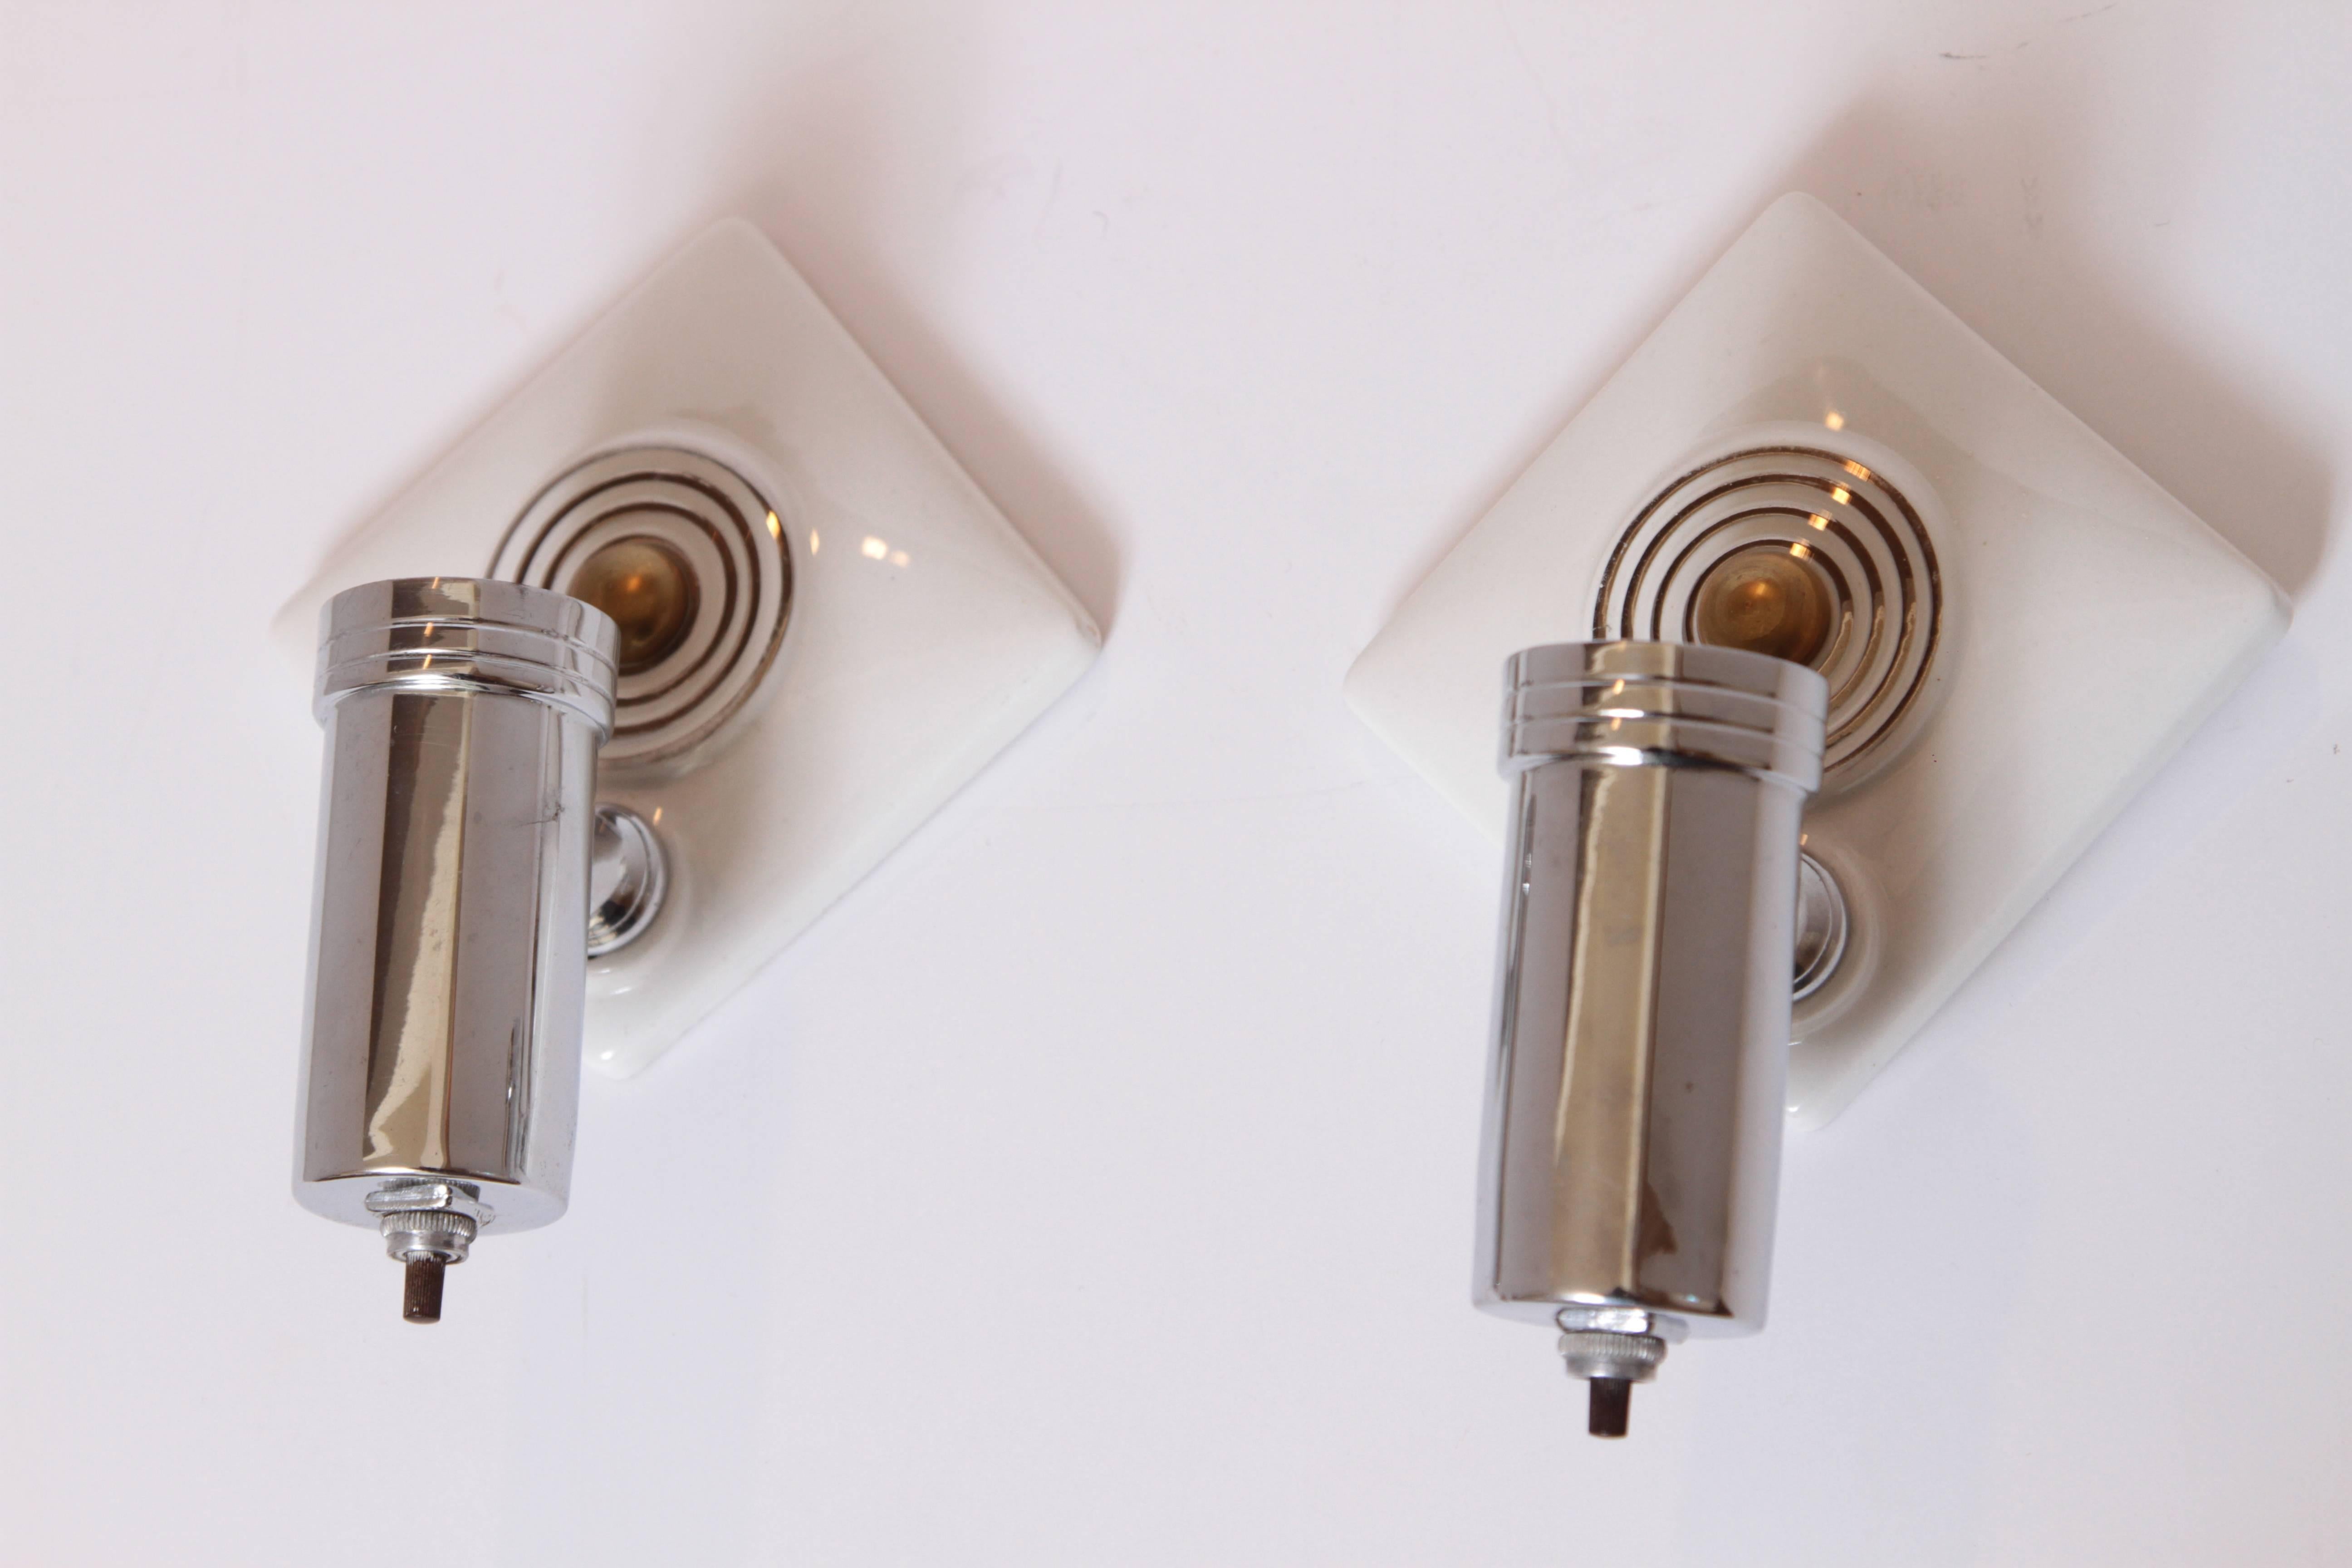 Pair of Machine Age Art Deco Efcolite skyscraper sconces by Walter Von Nessen.

One of Nessen's iconic early 1930s designs for Efcolite.
Original lustrous milky white glaze with applied platinum-fired concentric rings and chromed